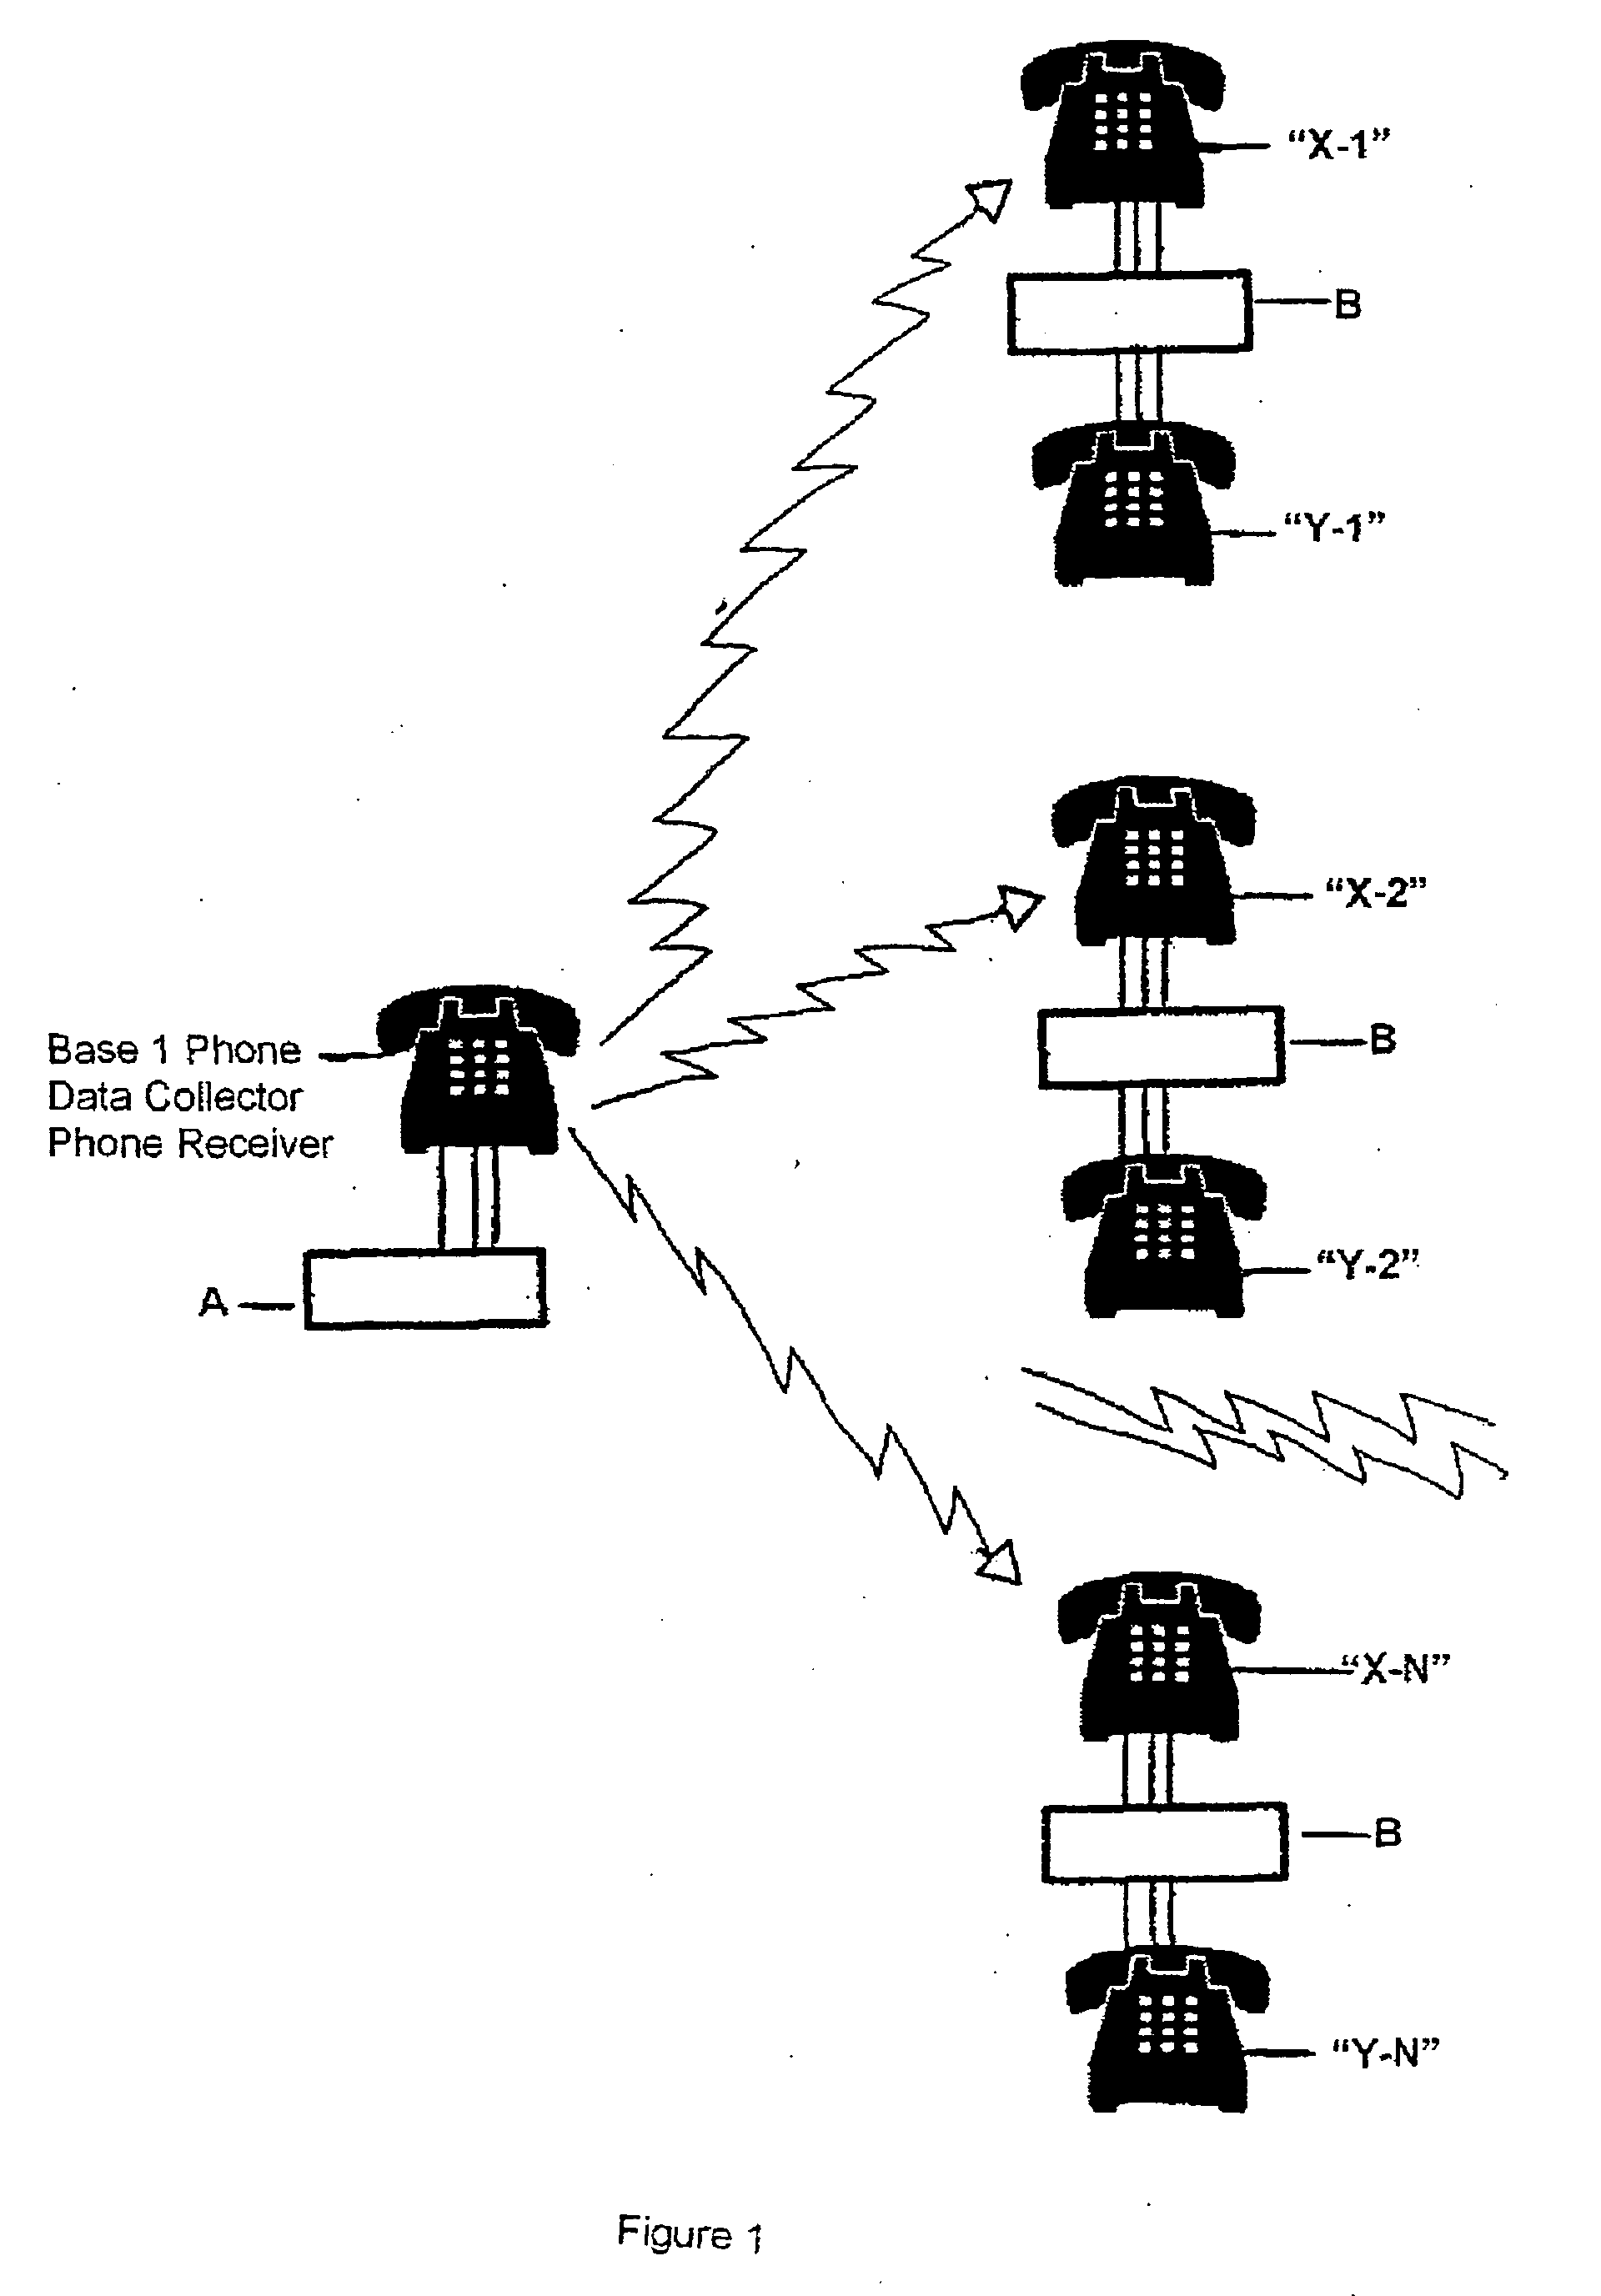 Addressing data loggers and telephones upon networks, including upon the PSTN, in parallel and in common in groups, with subsequent secondary addressing of devices uniquely